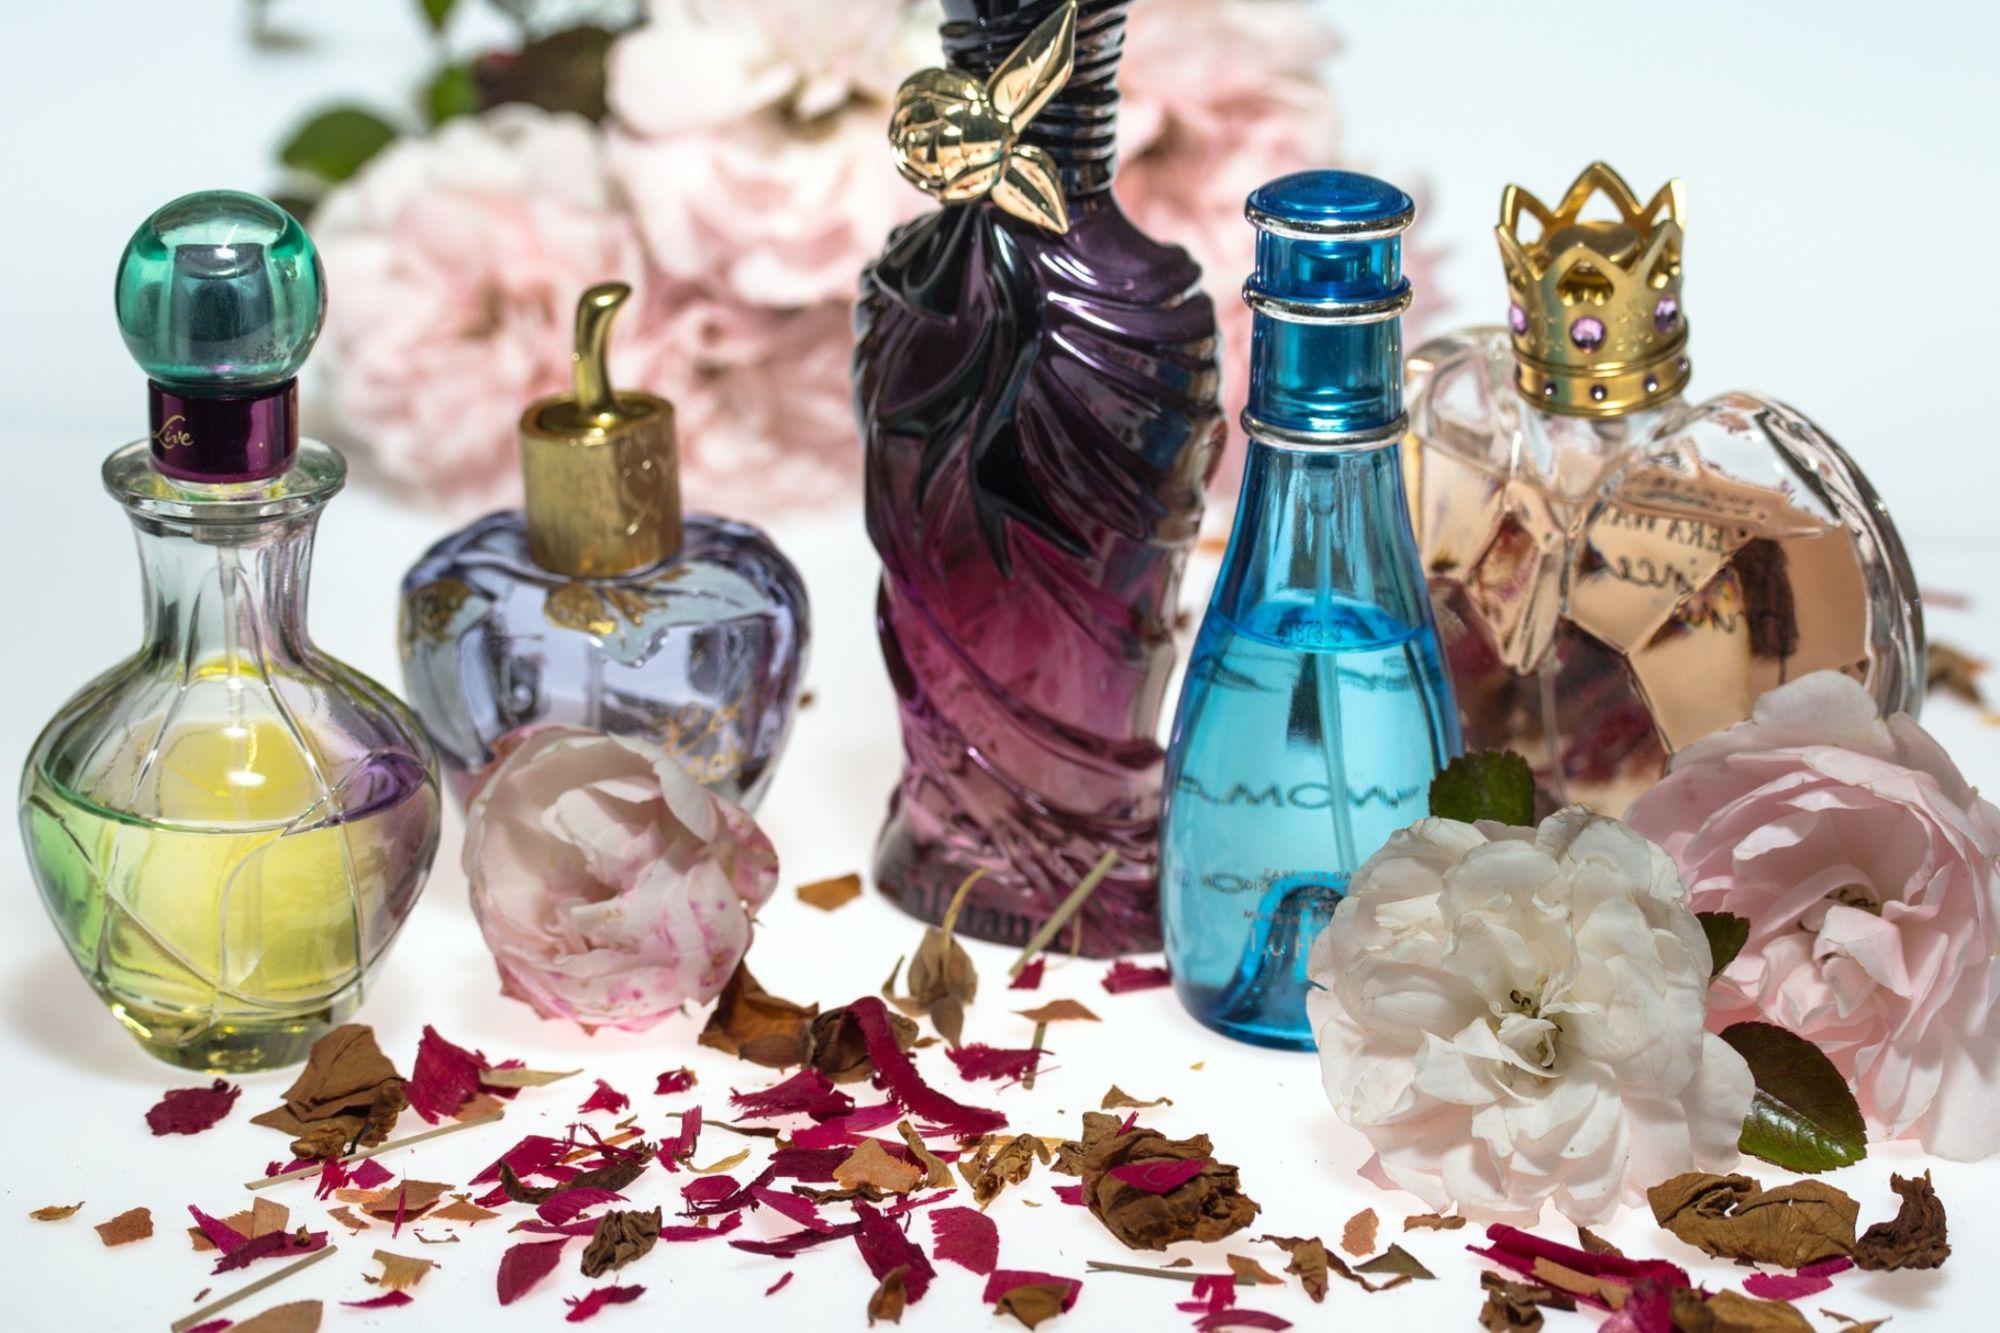 Perfume Market Global Size to Reach US$ 47.6 Billion by 2027, At Growth Rate (CAGR) of 6.1%